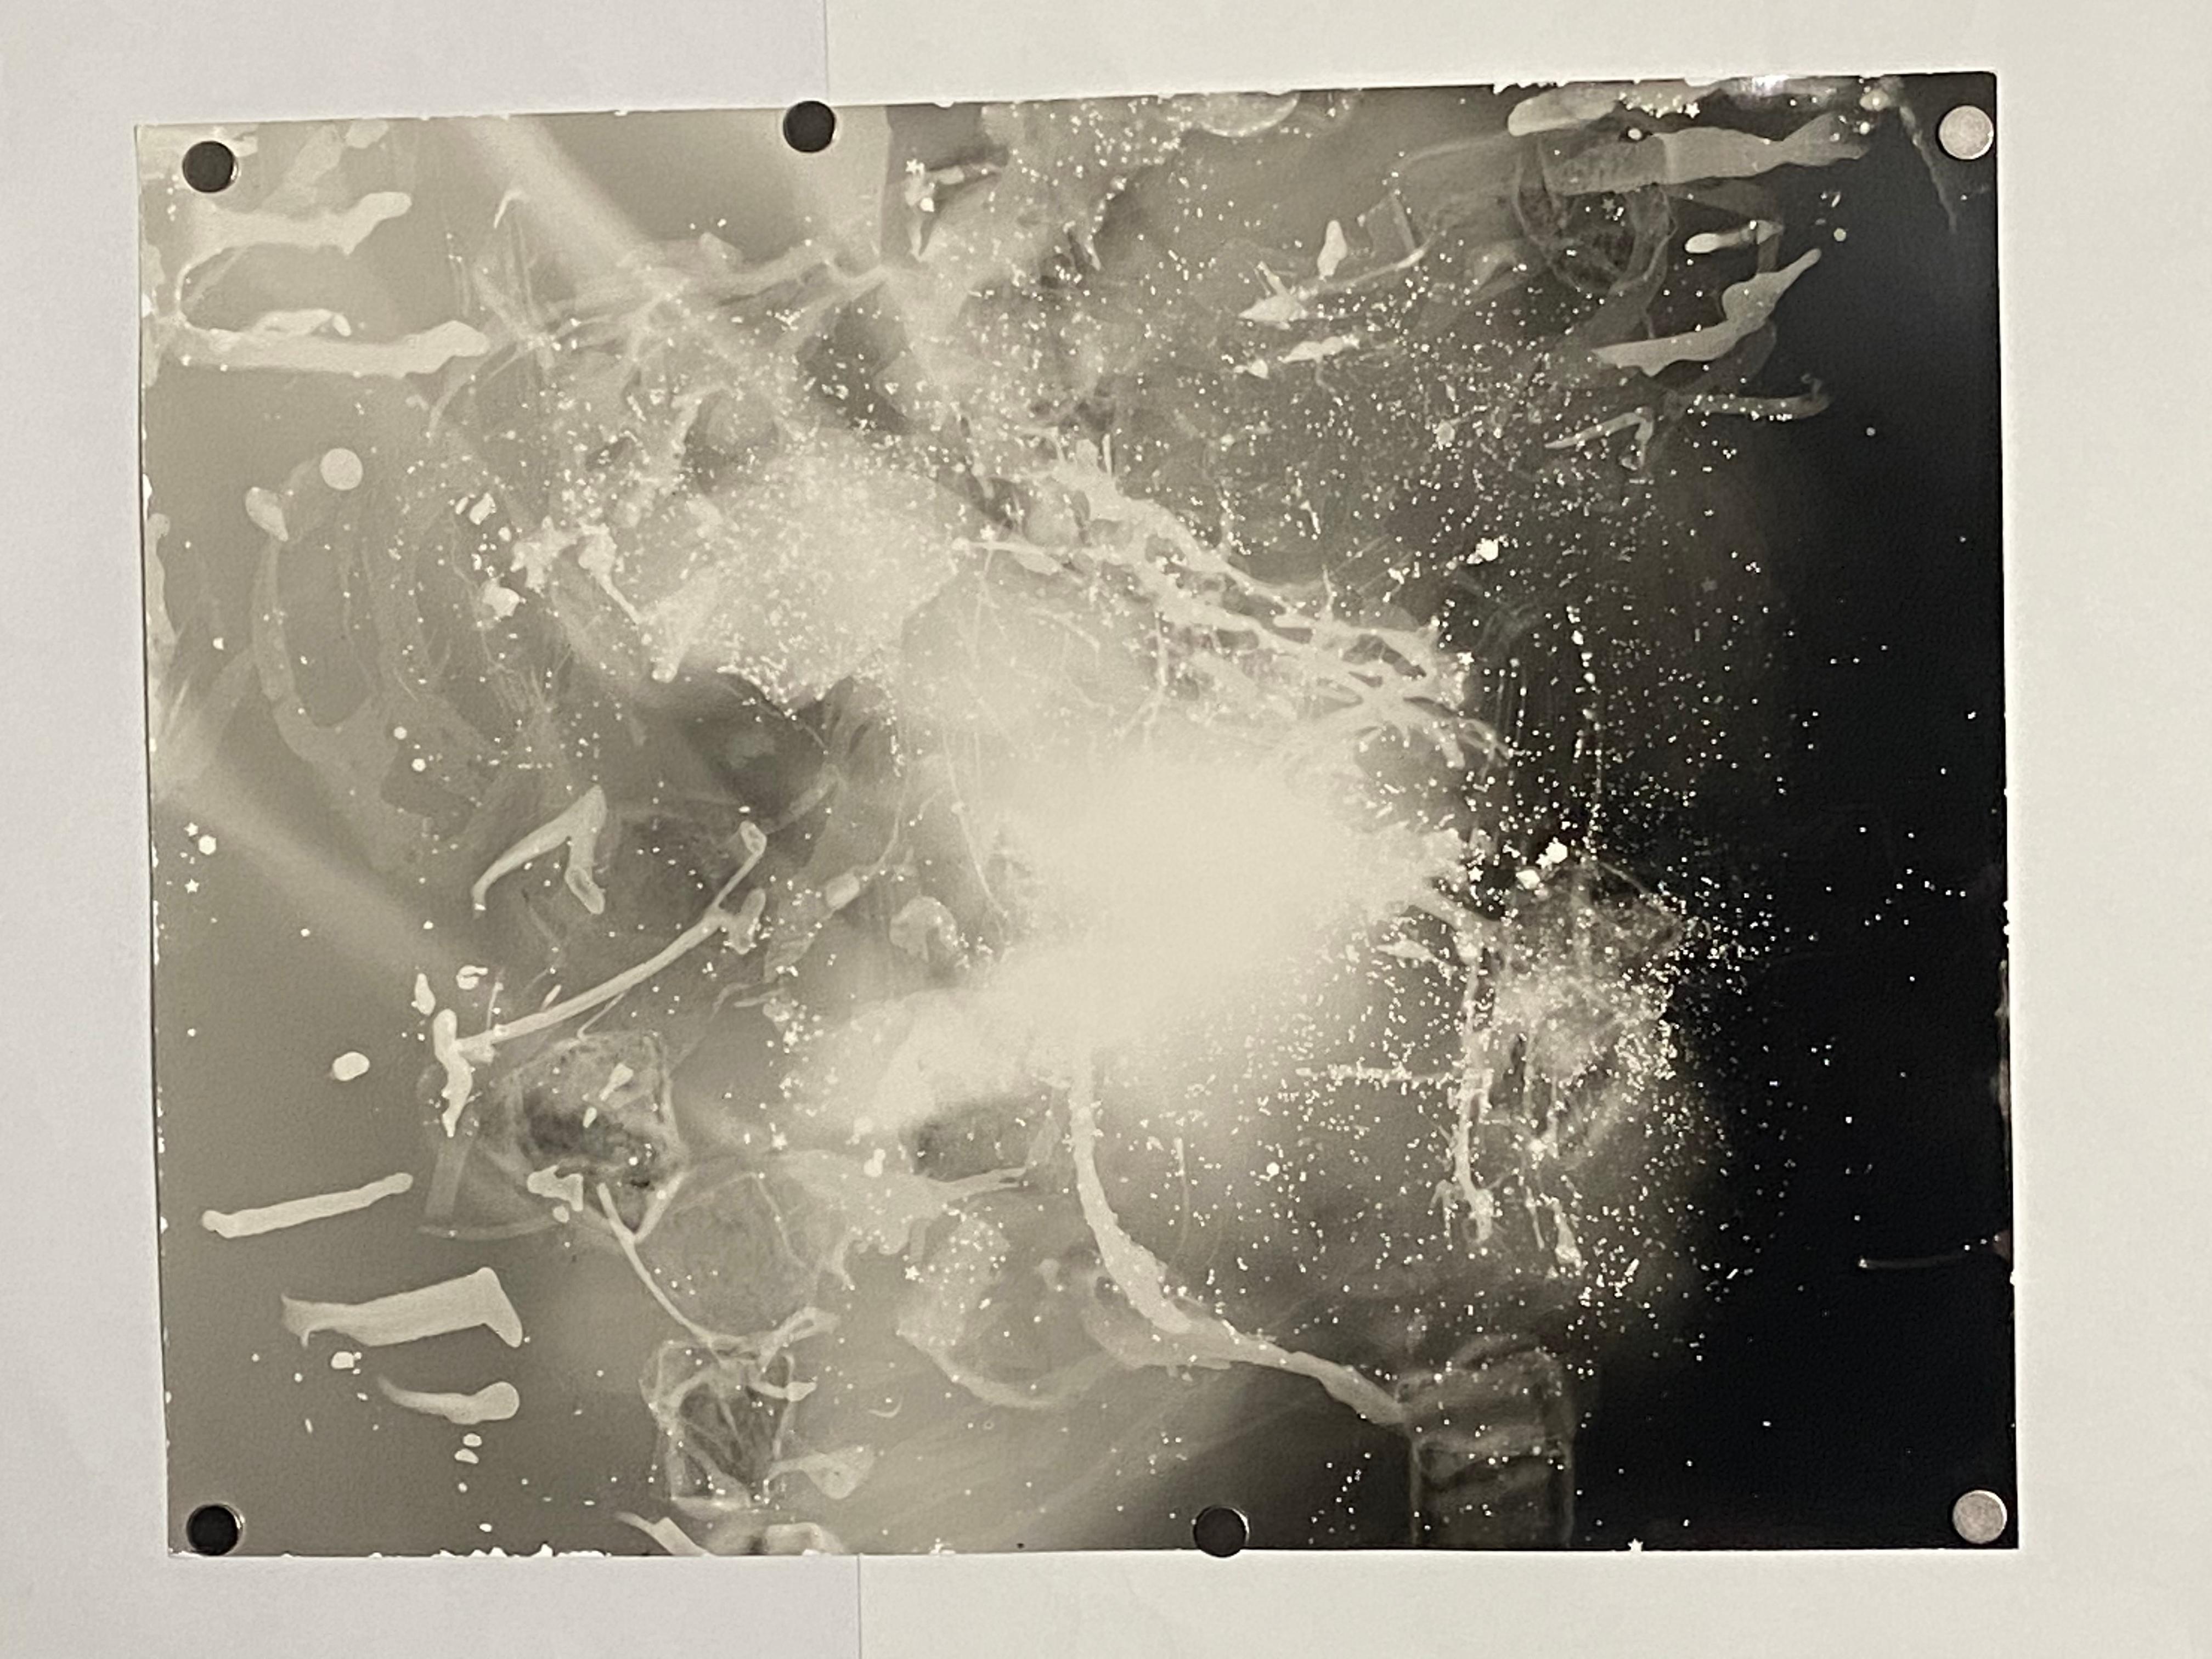 UPDATE - THIS UNIQUE PRINT IS NOW BACK IN MY POSSESSION & CURRENTLY AVAILABLE

One-of-a-kind alt process photogram (silver gelatin print made sans enlarger); Mixed process multiple exposure with SNOW, ice, glitter, sand, and flowers. All of my